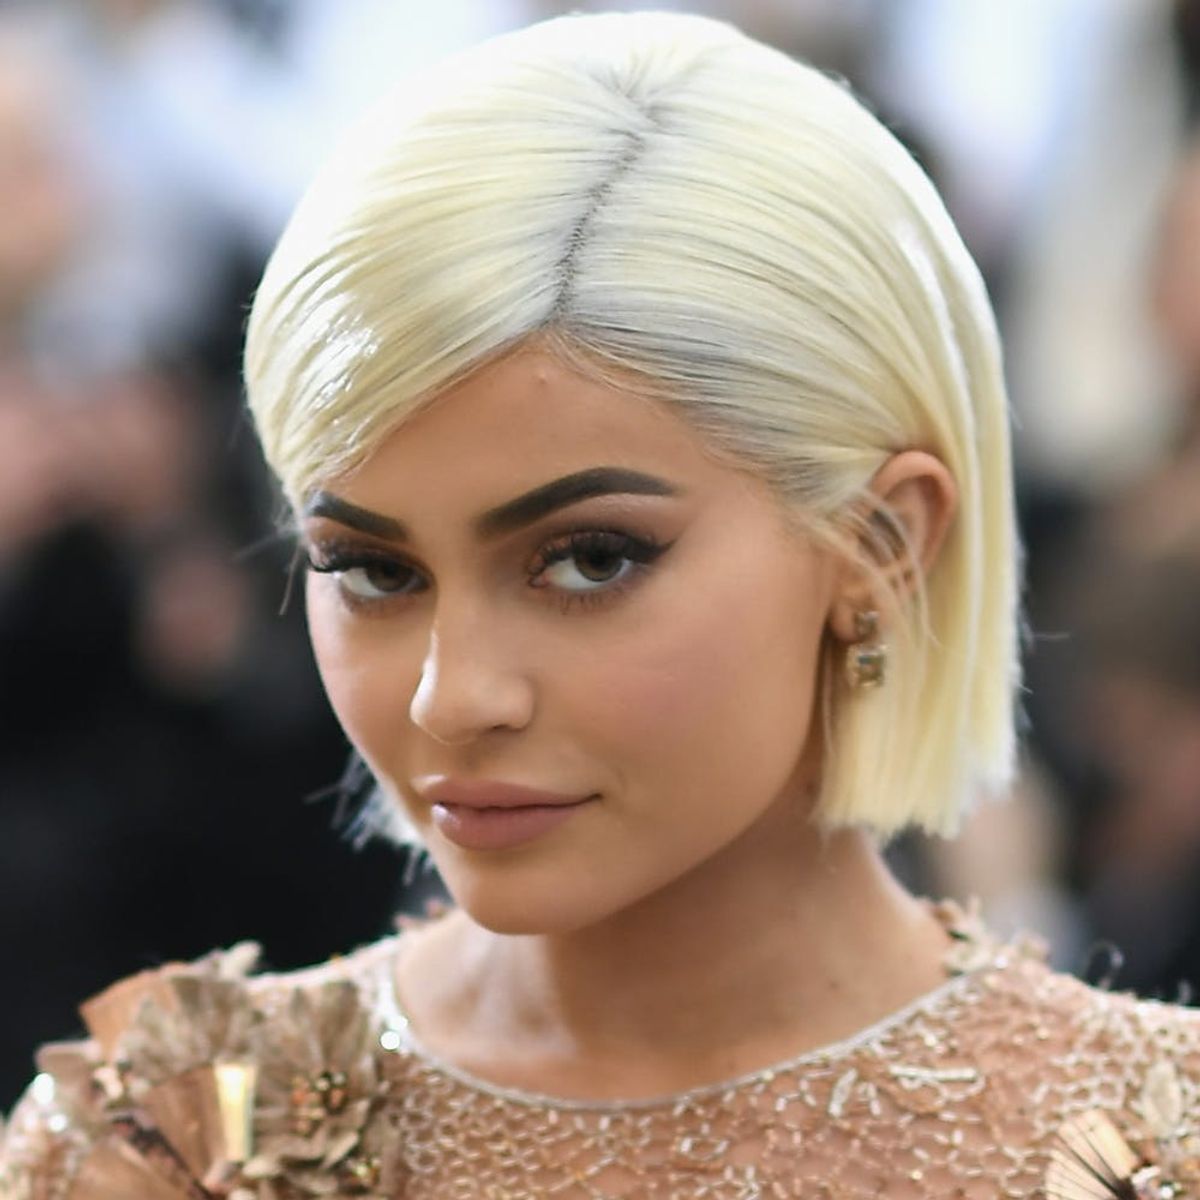 Kylie Jenner Has Big Plans for Her $420 Million Kylie Cosmetics Brand